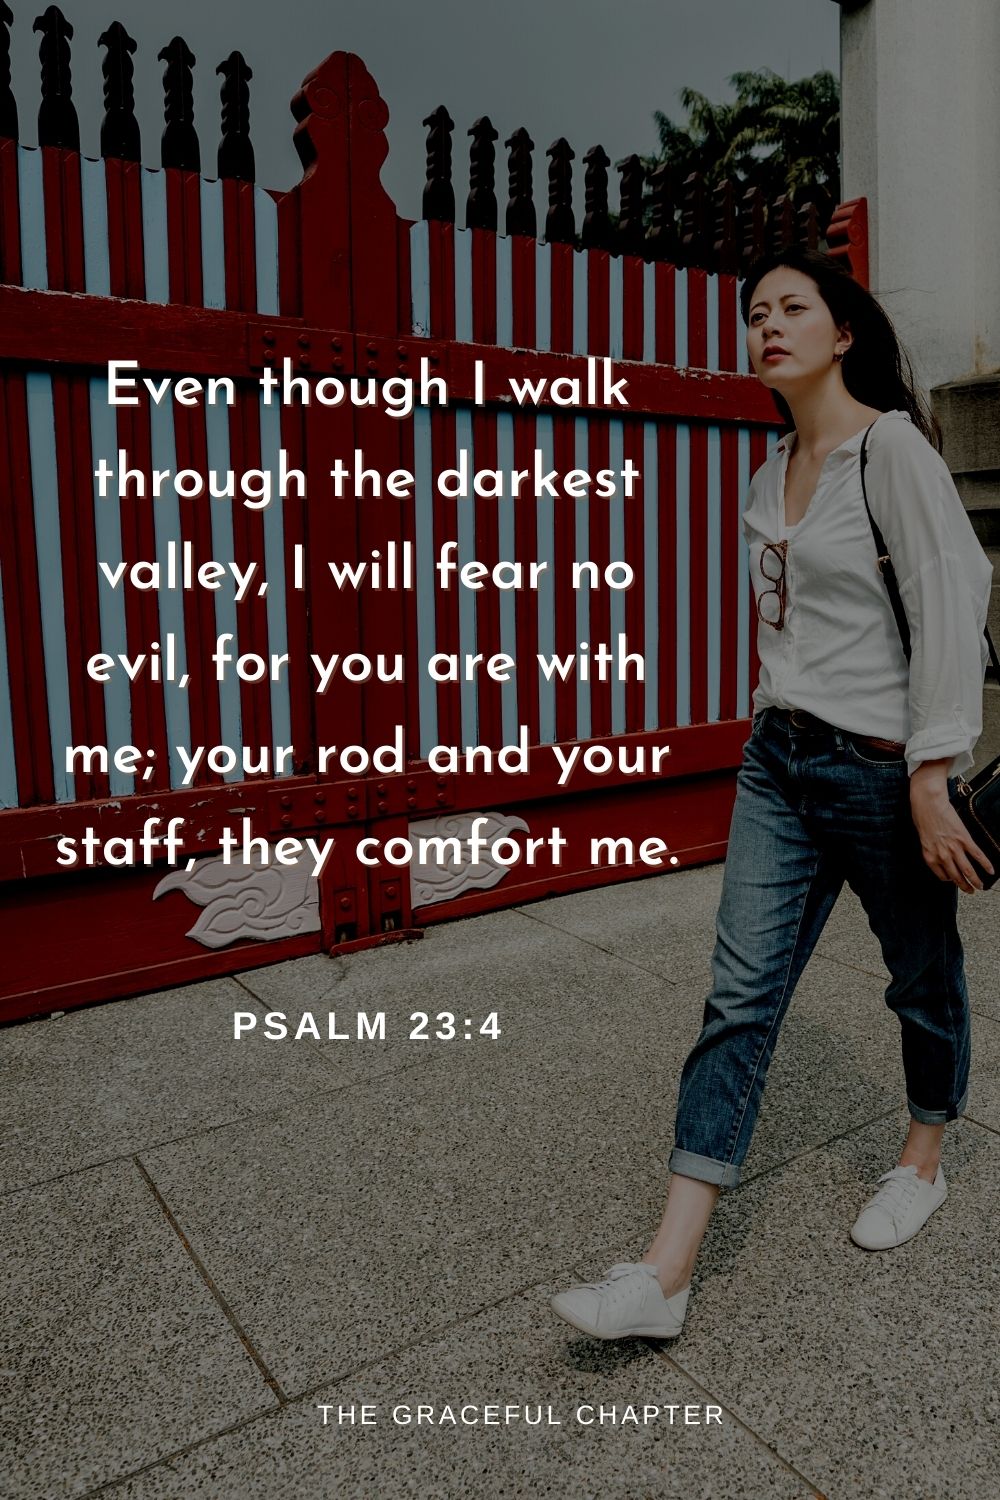 Even though I walk through the darkest valley, I will fear no evil, for you are with me; your rod and your staff, they comfort me.